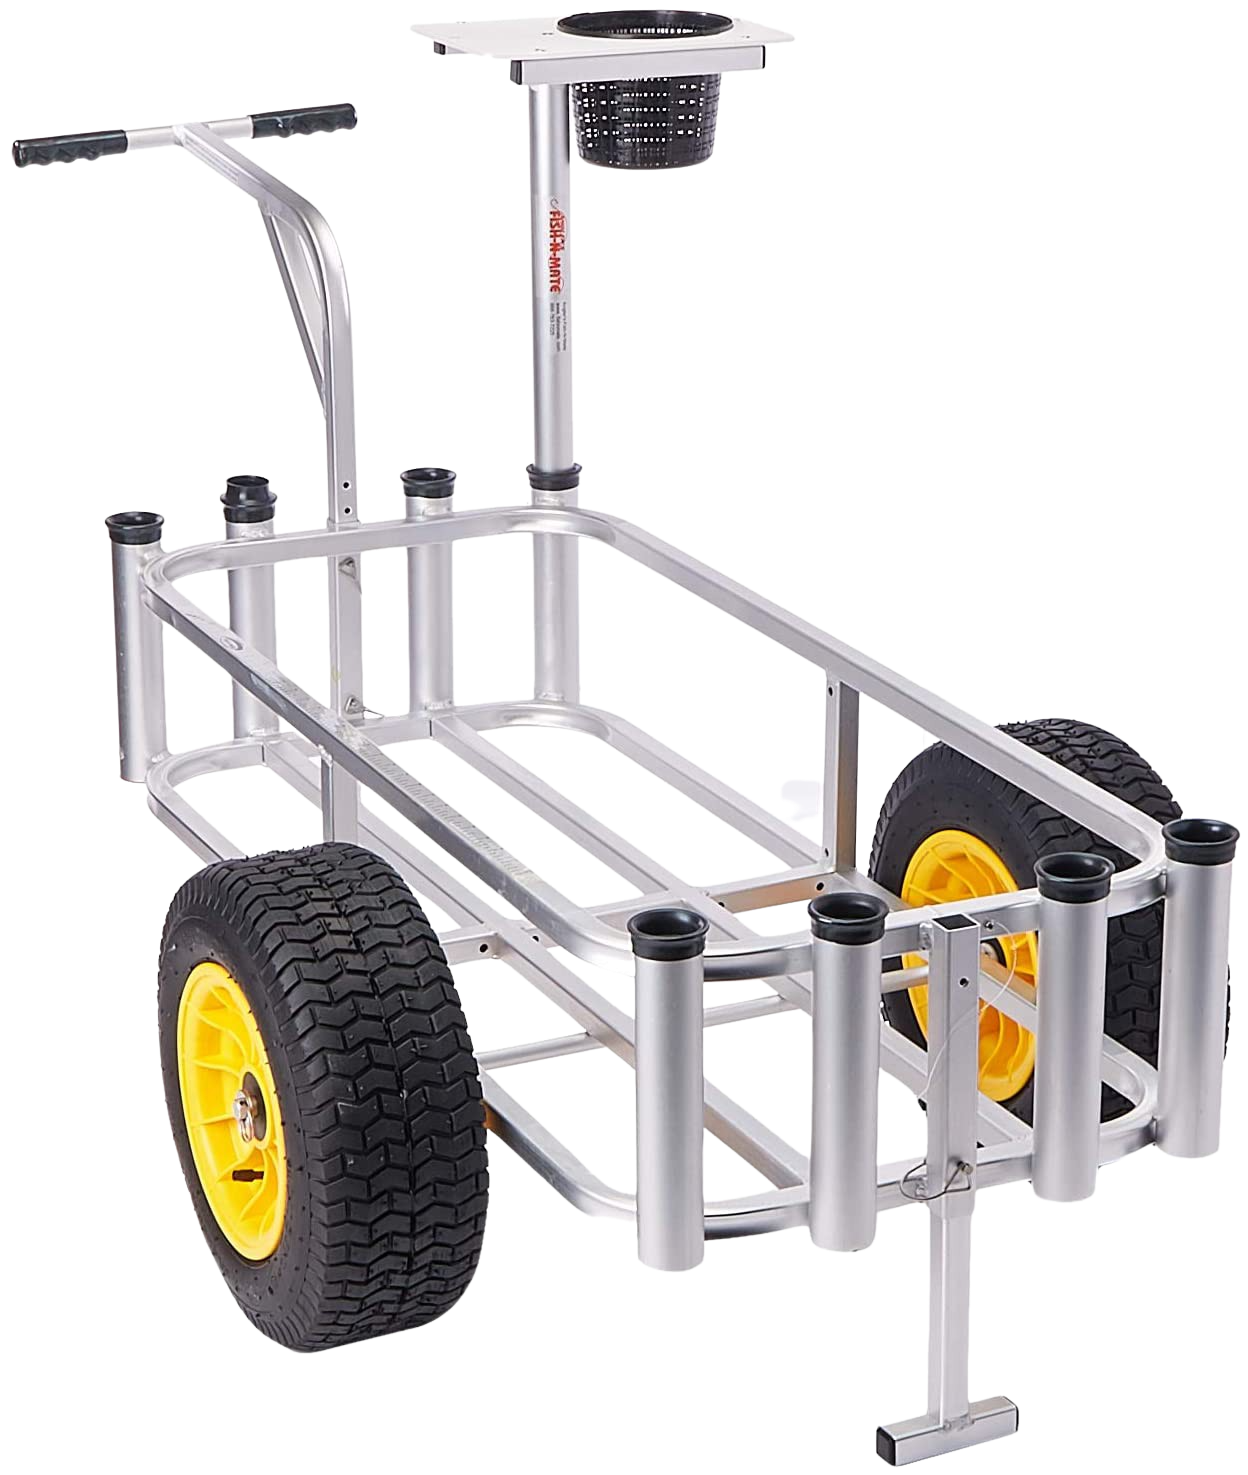 Anglers Fish N Mate, Angler's Fish-N-Mate 143 Pier Cart with Cutting Board and Bait Basket New